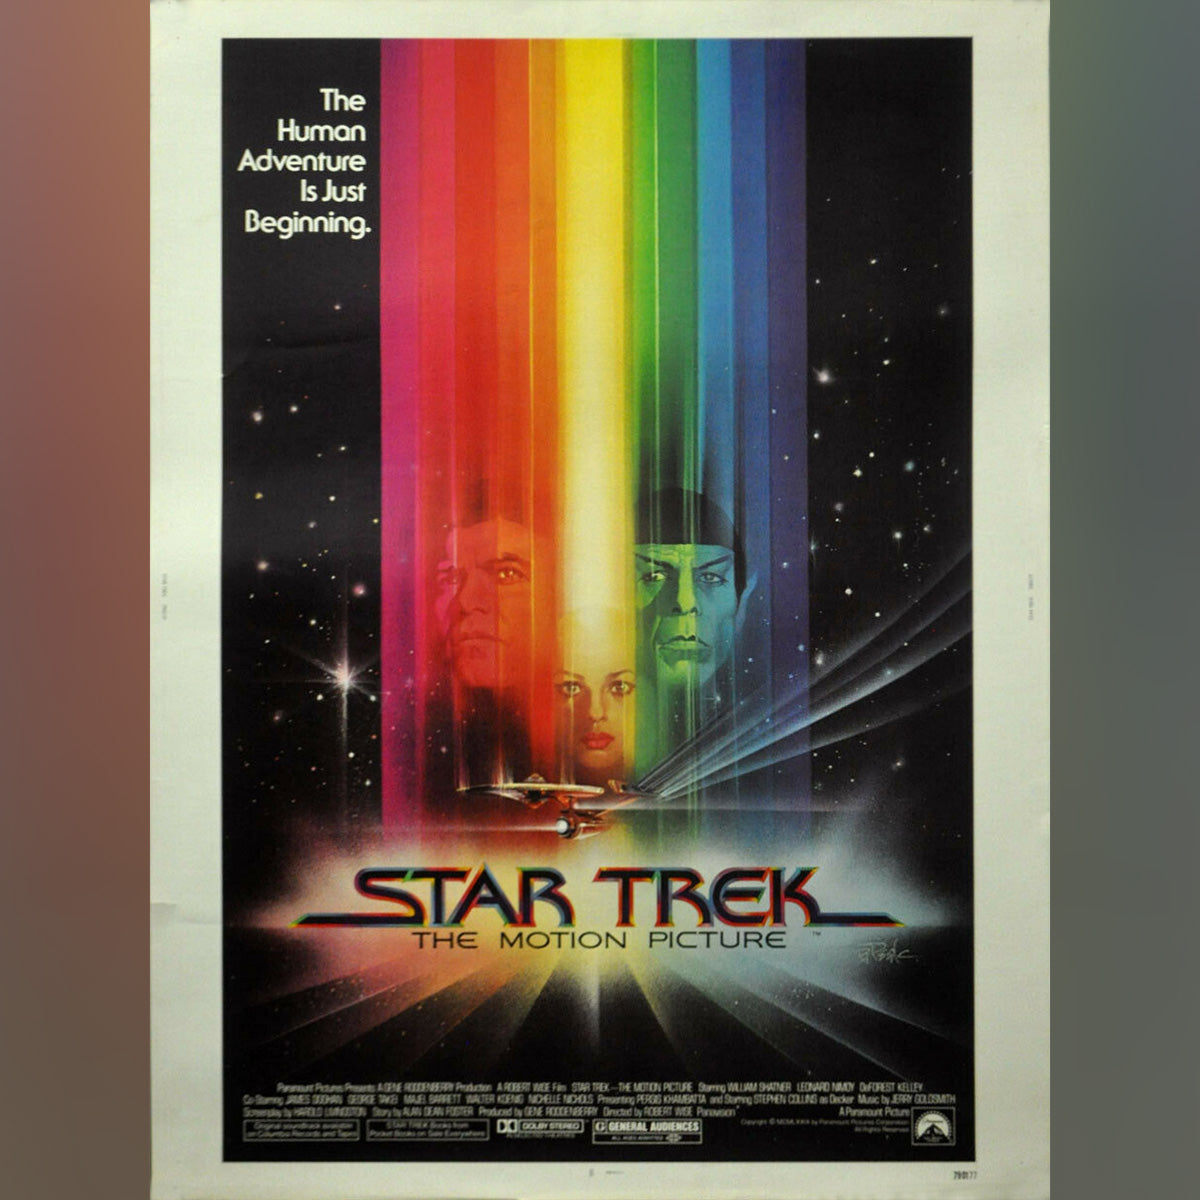 Original Movie Poster of Star Trek: The Motion Picture (1979)